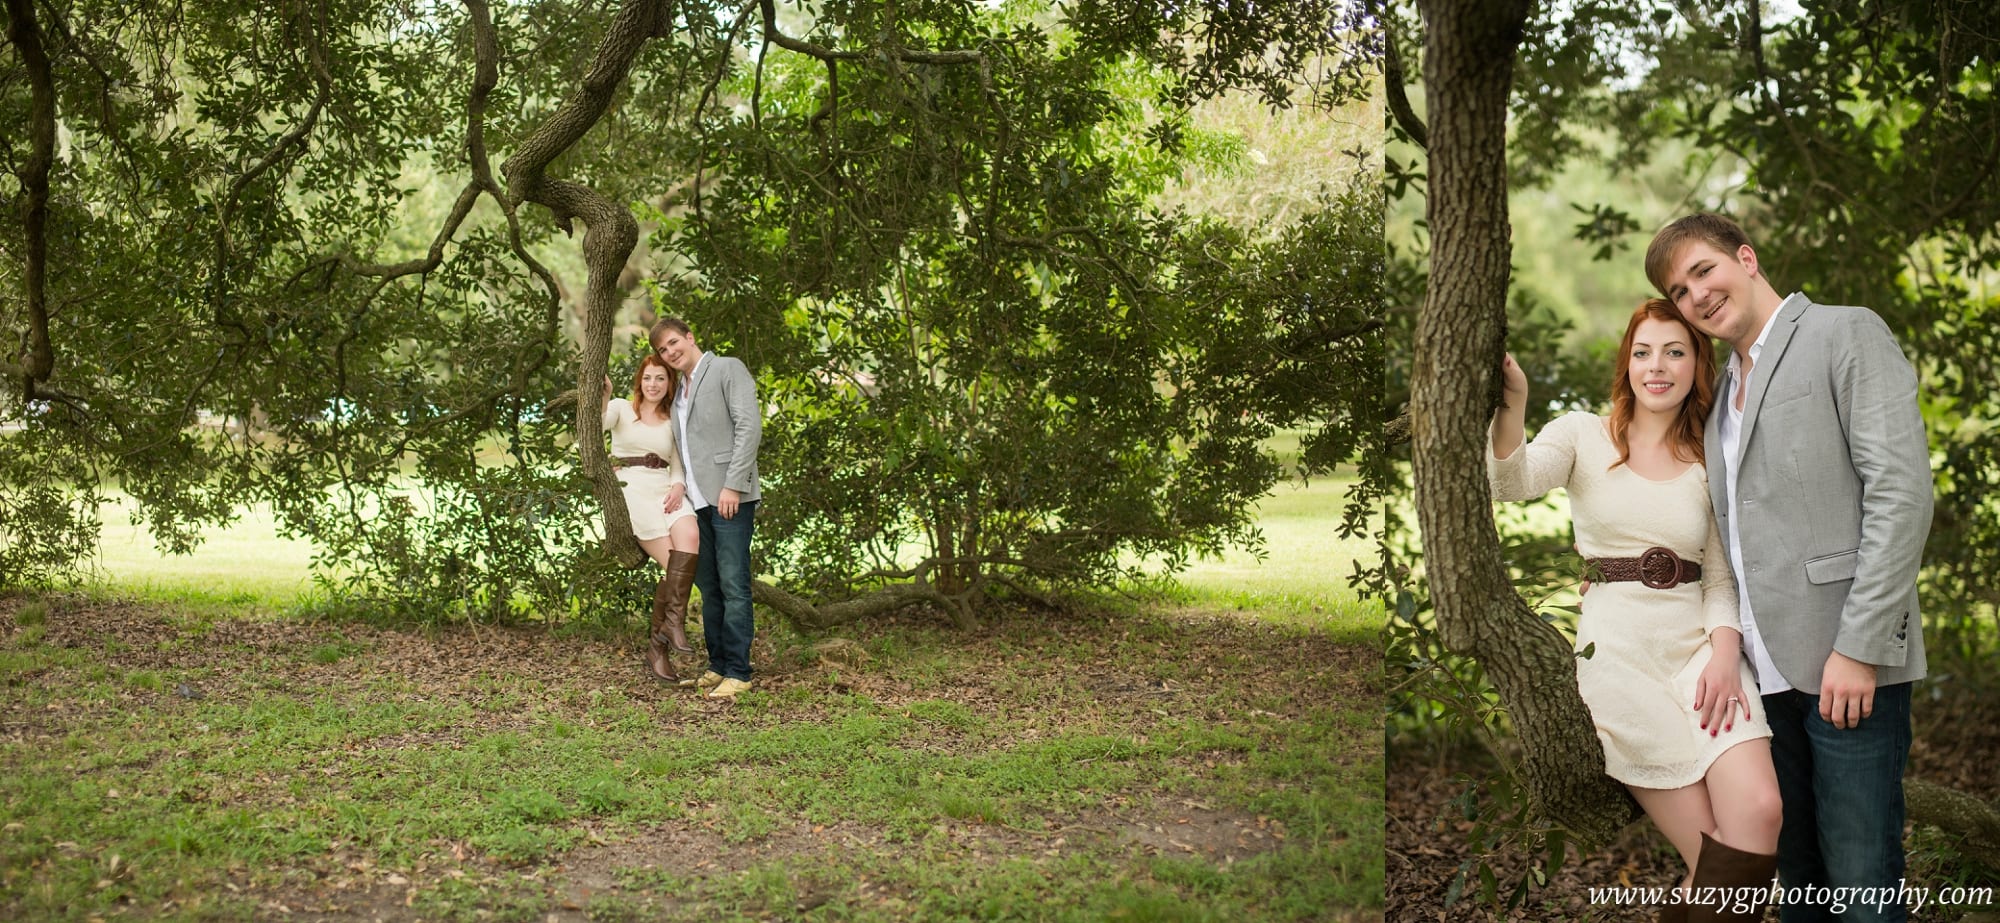 engagements-new orleans-texas-baton rouge-lake charles-suzy g-photography-suzygphotography_0136